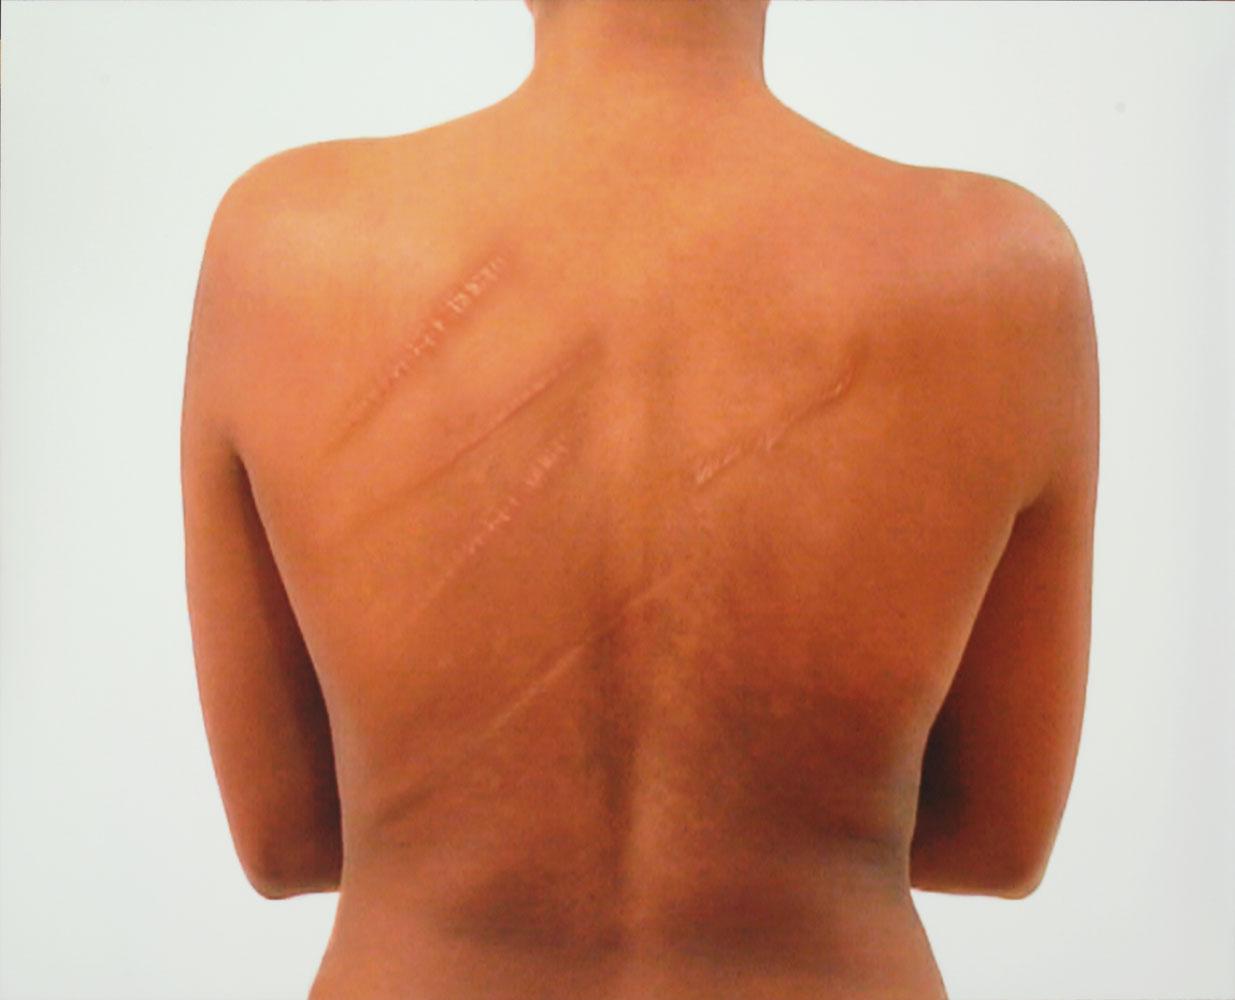 The back of a medium-skinned person standing against a white background. There are diagonal, deep scars across the back.